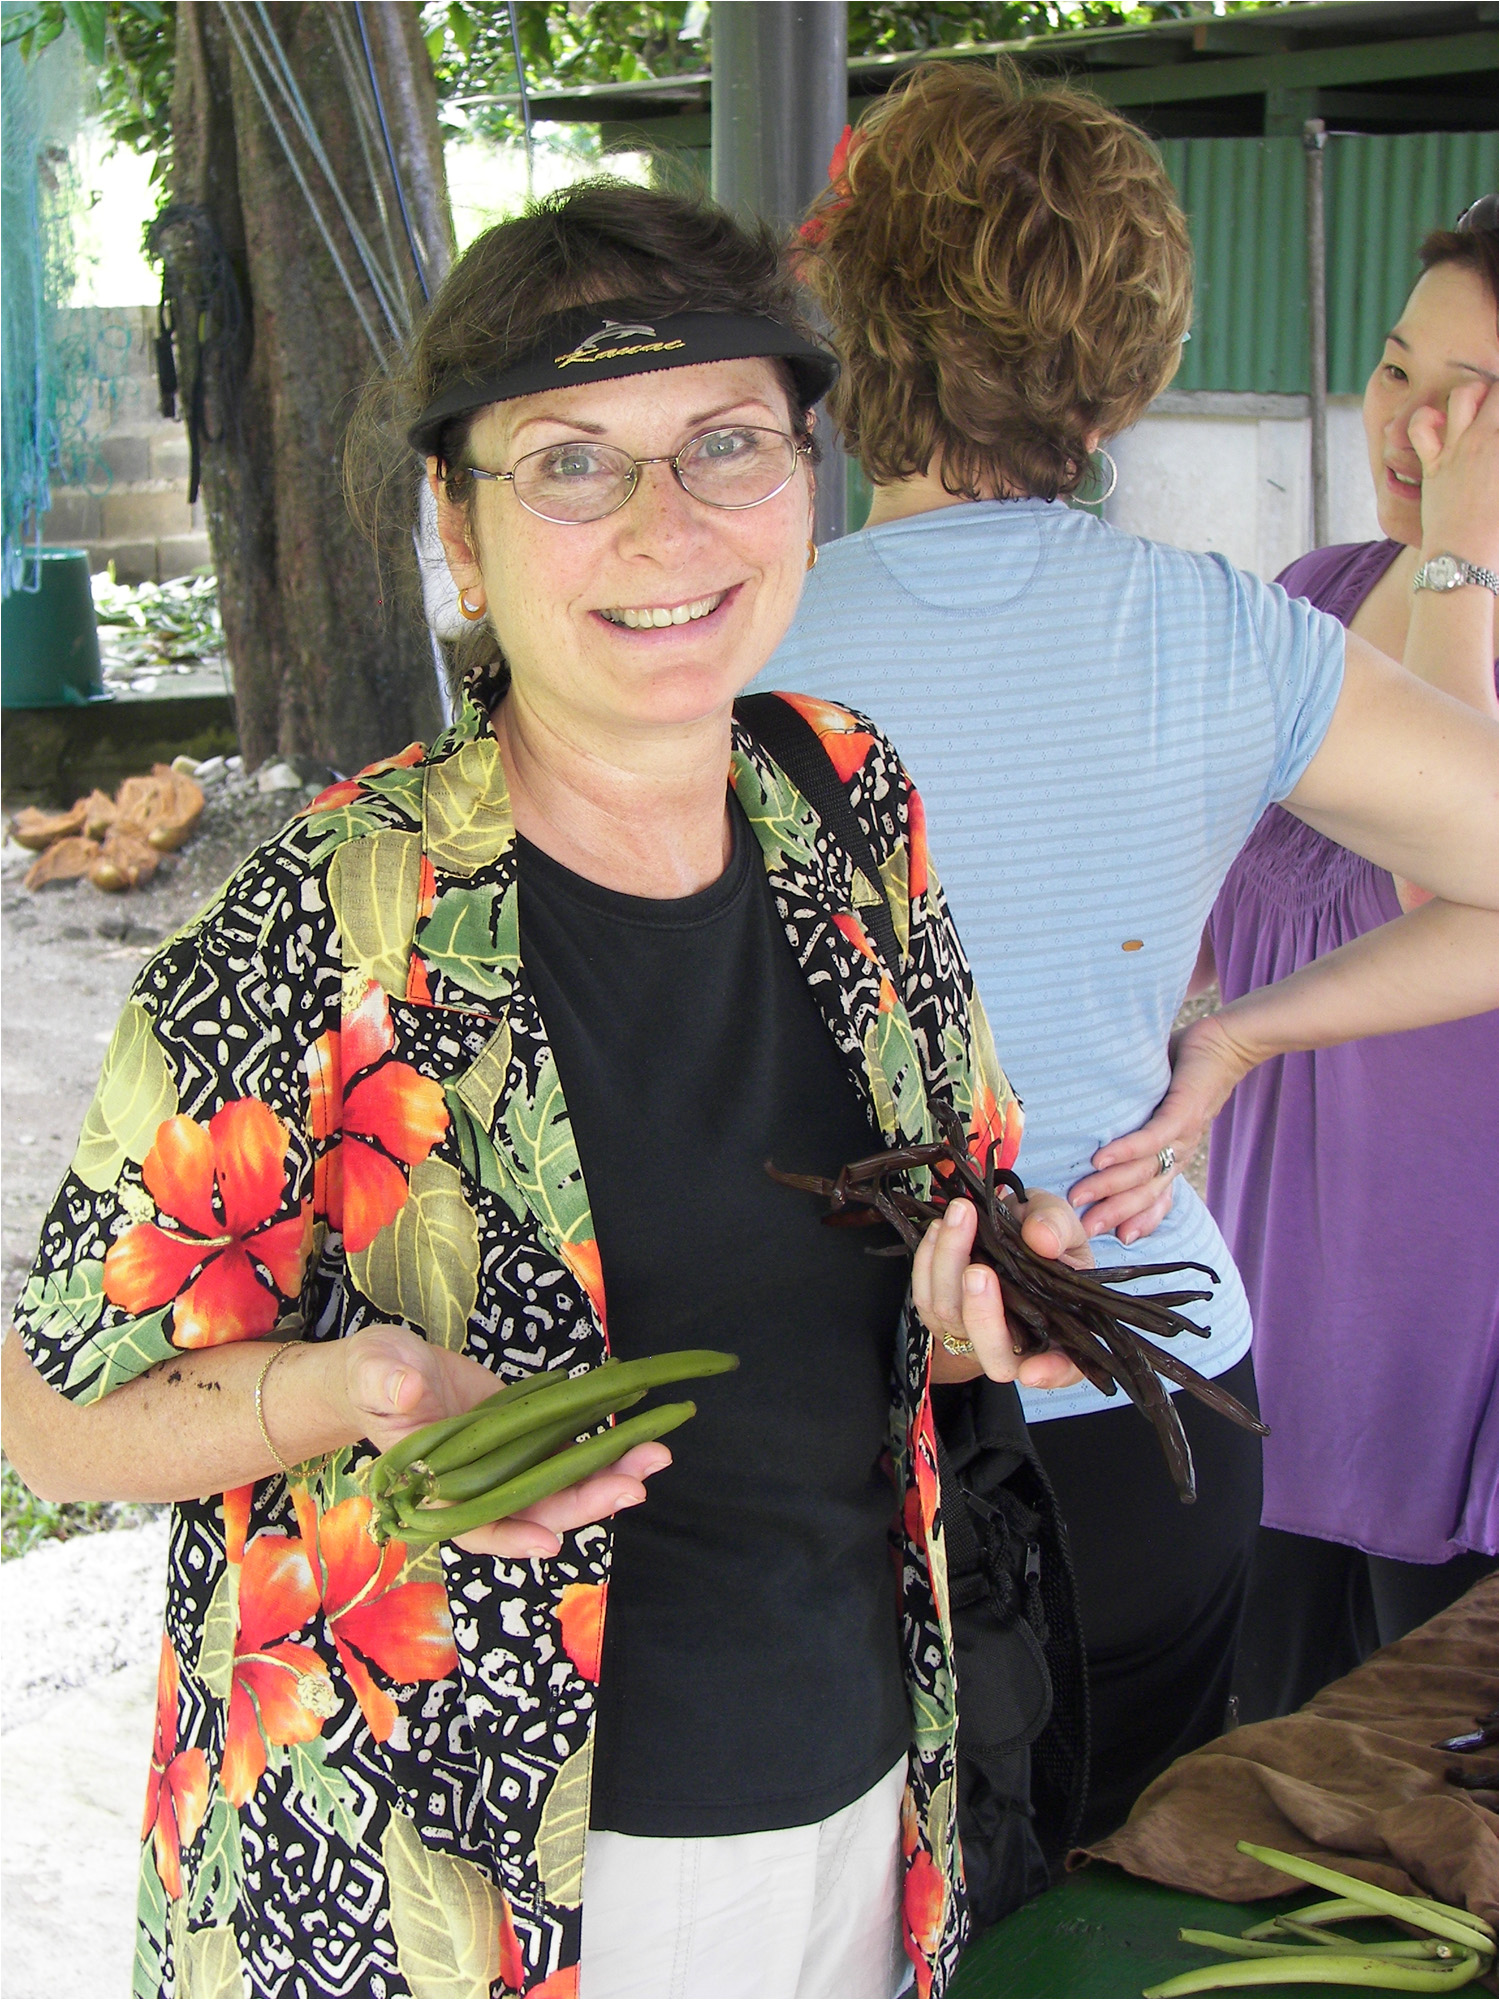 Katherine holding vanilla beans before and after ripening process.